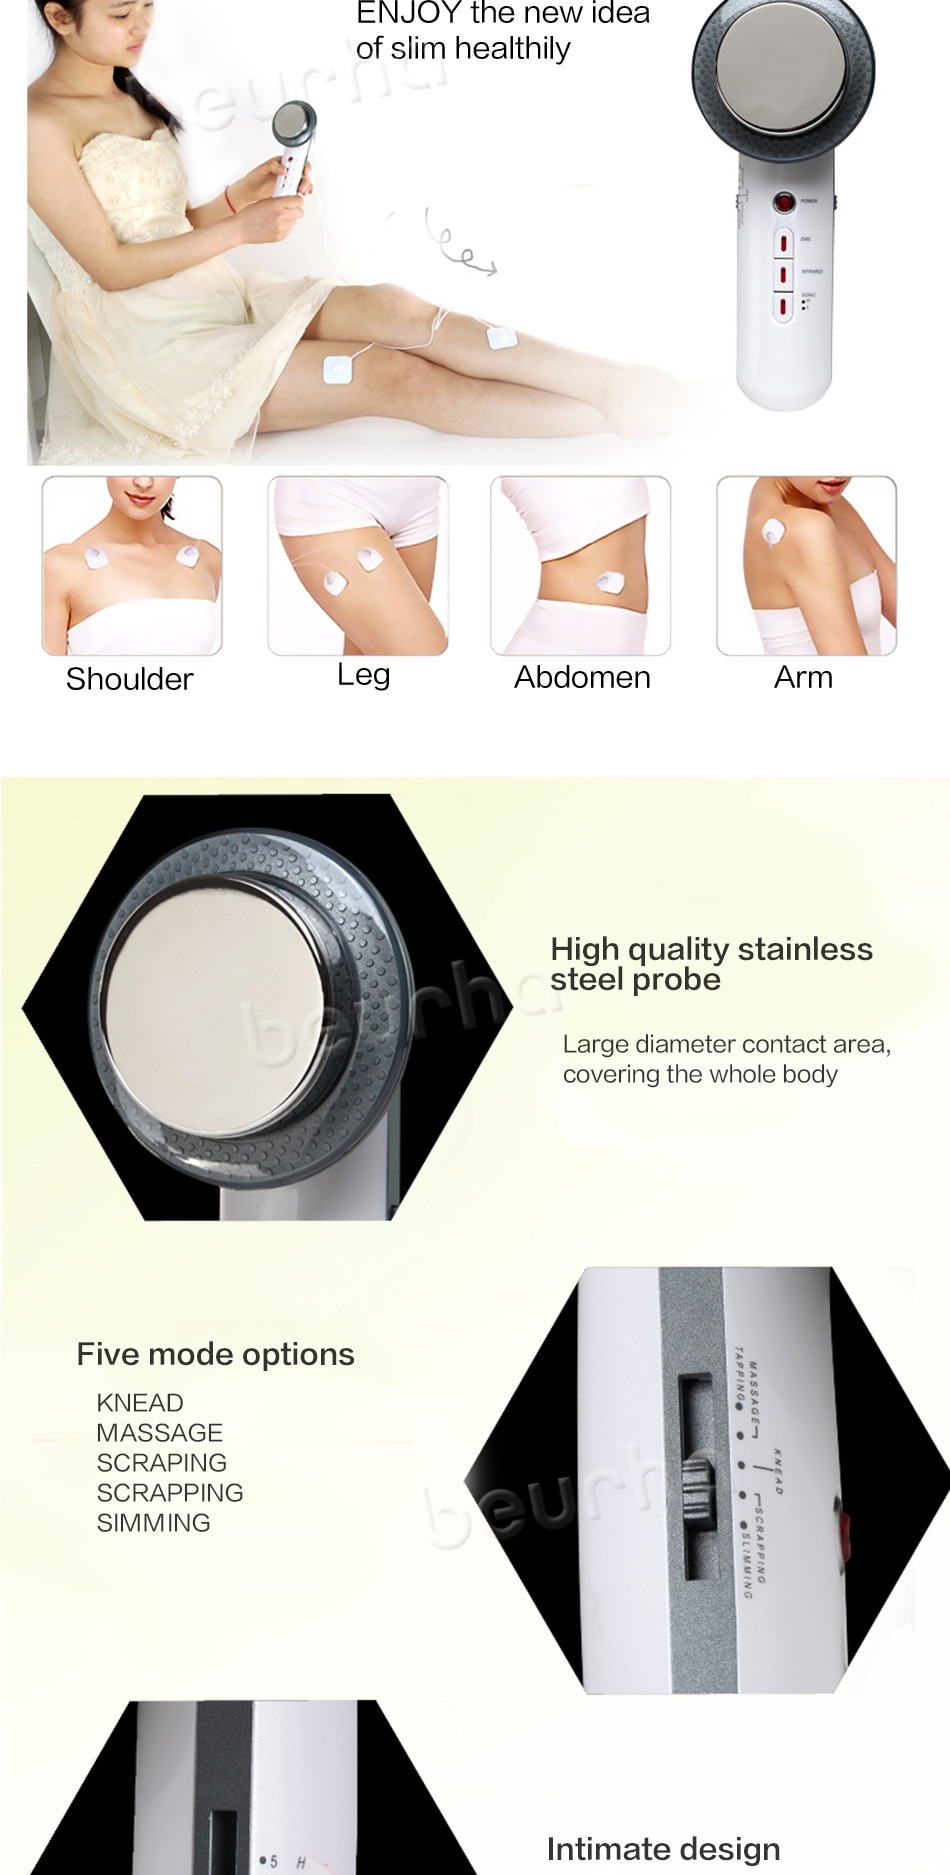 3 in 1 Facial Lifting EMS Infrared Ultrasonic Body Massager Device Ultrasound Slimming Fat Burner Cavitation Face Beauty Machine